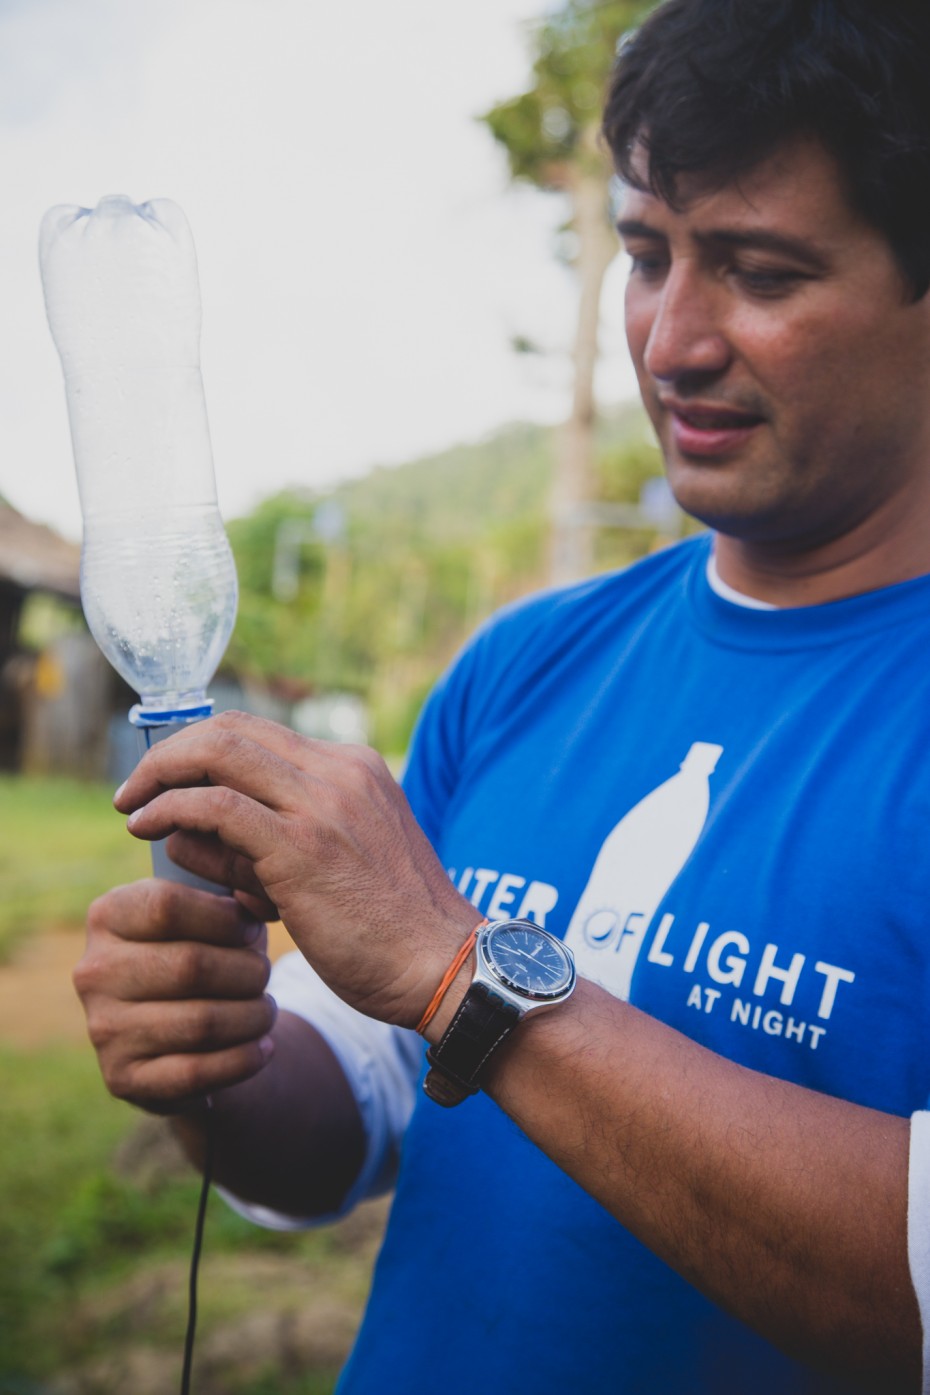 Diaz's Liter of Light foundation has helped put 480,000 solar-powered house and street lights in rural and disaster-stricken areas around the world. - Photo: Joe Kiat